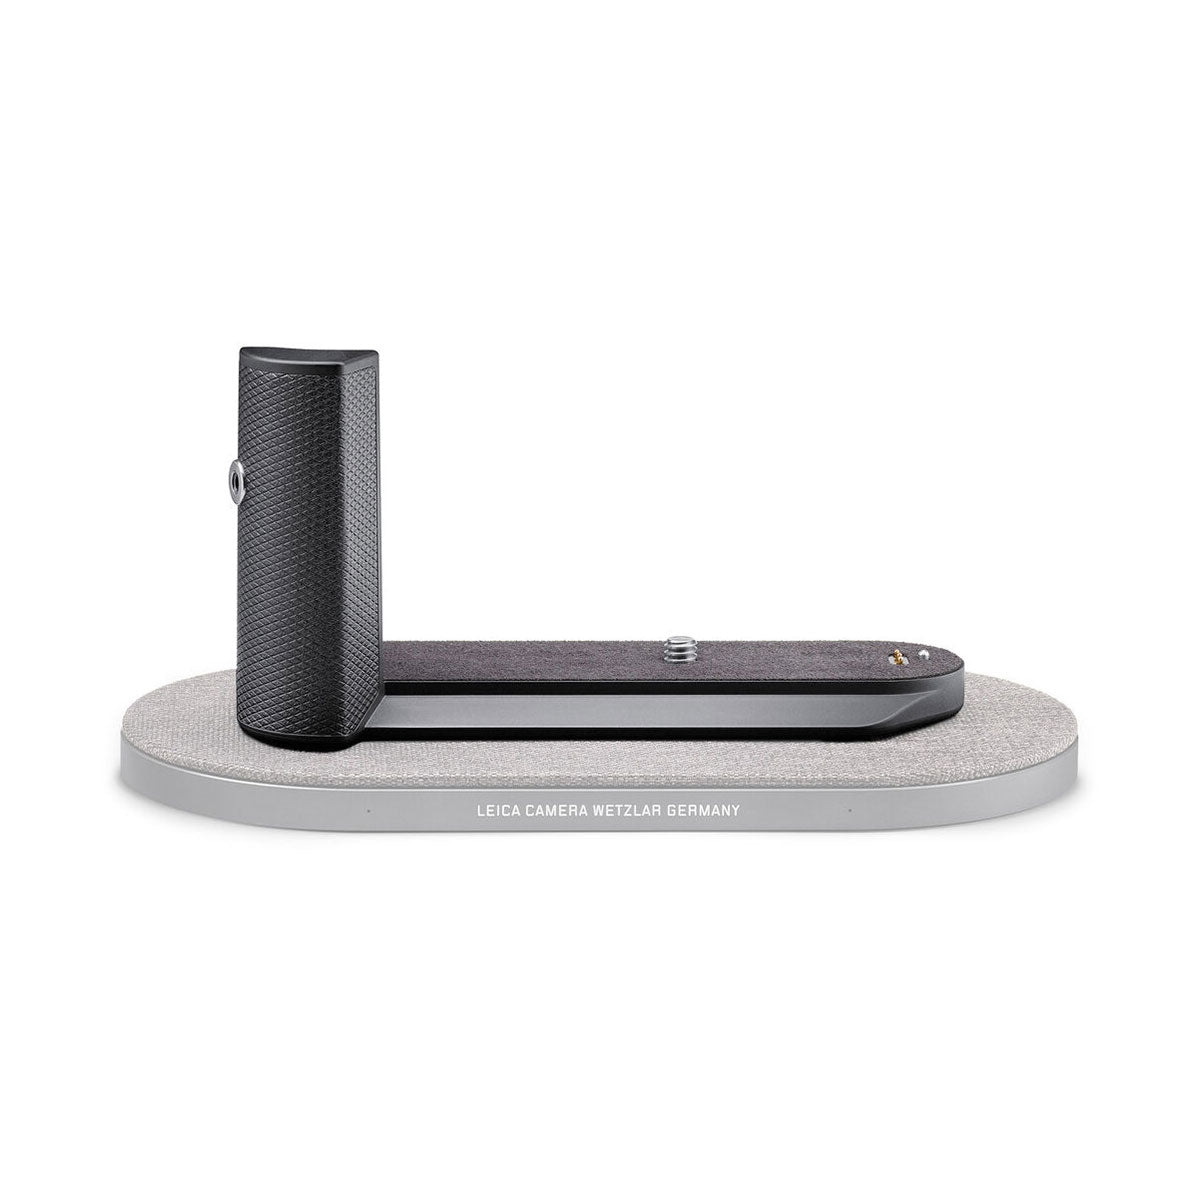 image_note Drop XL Wireless Charging base sold separately